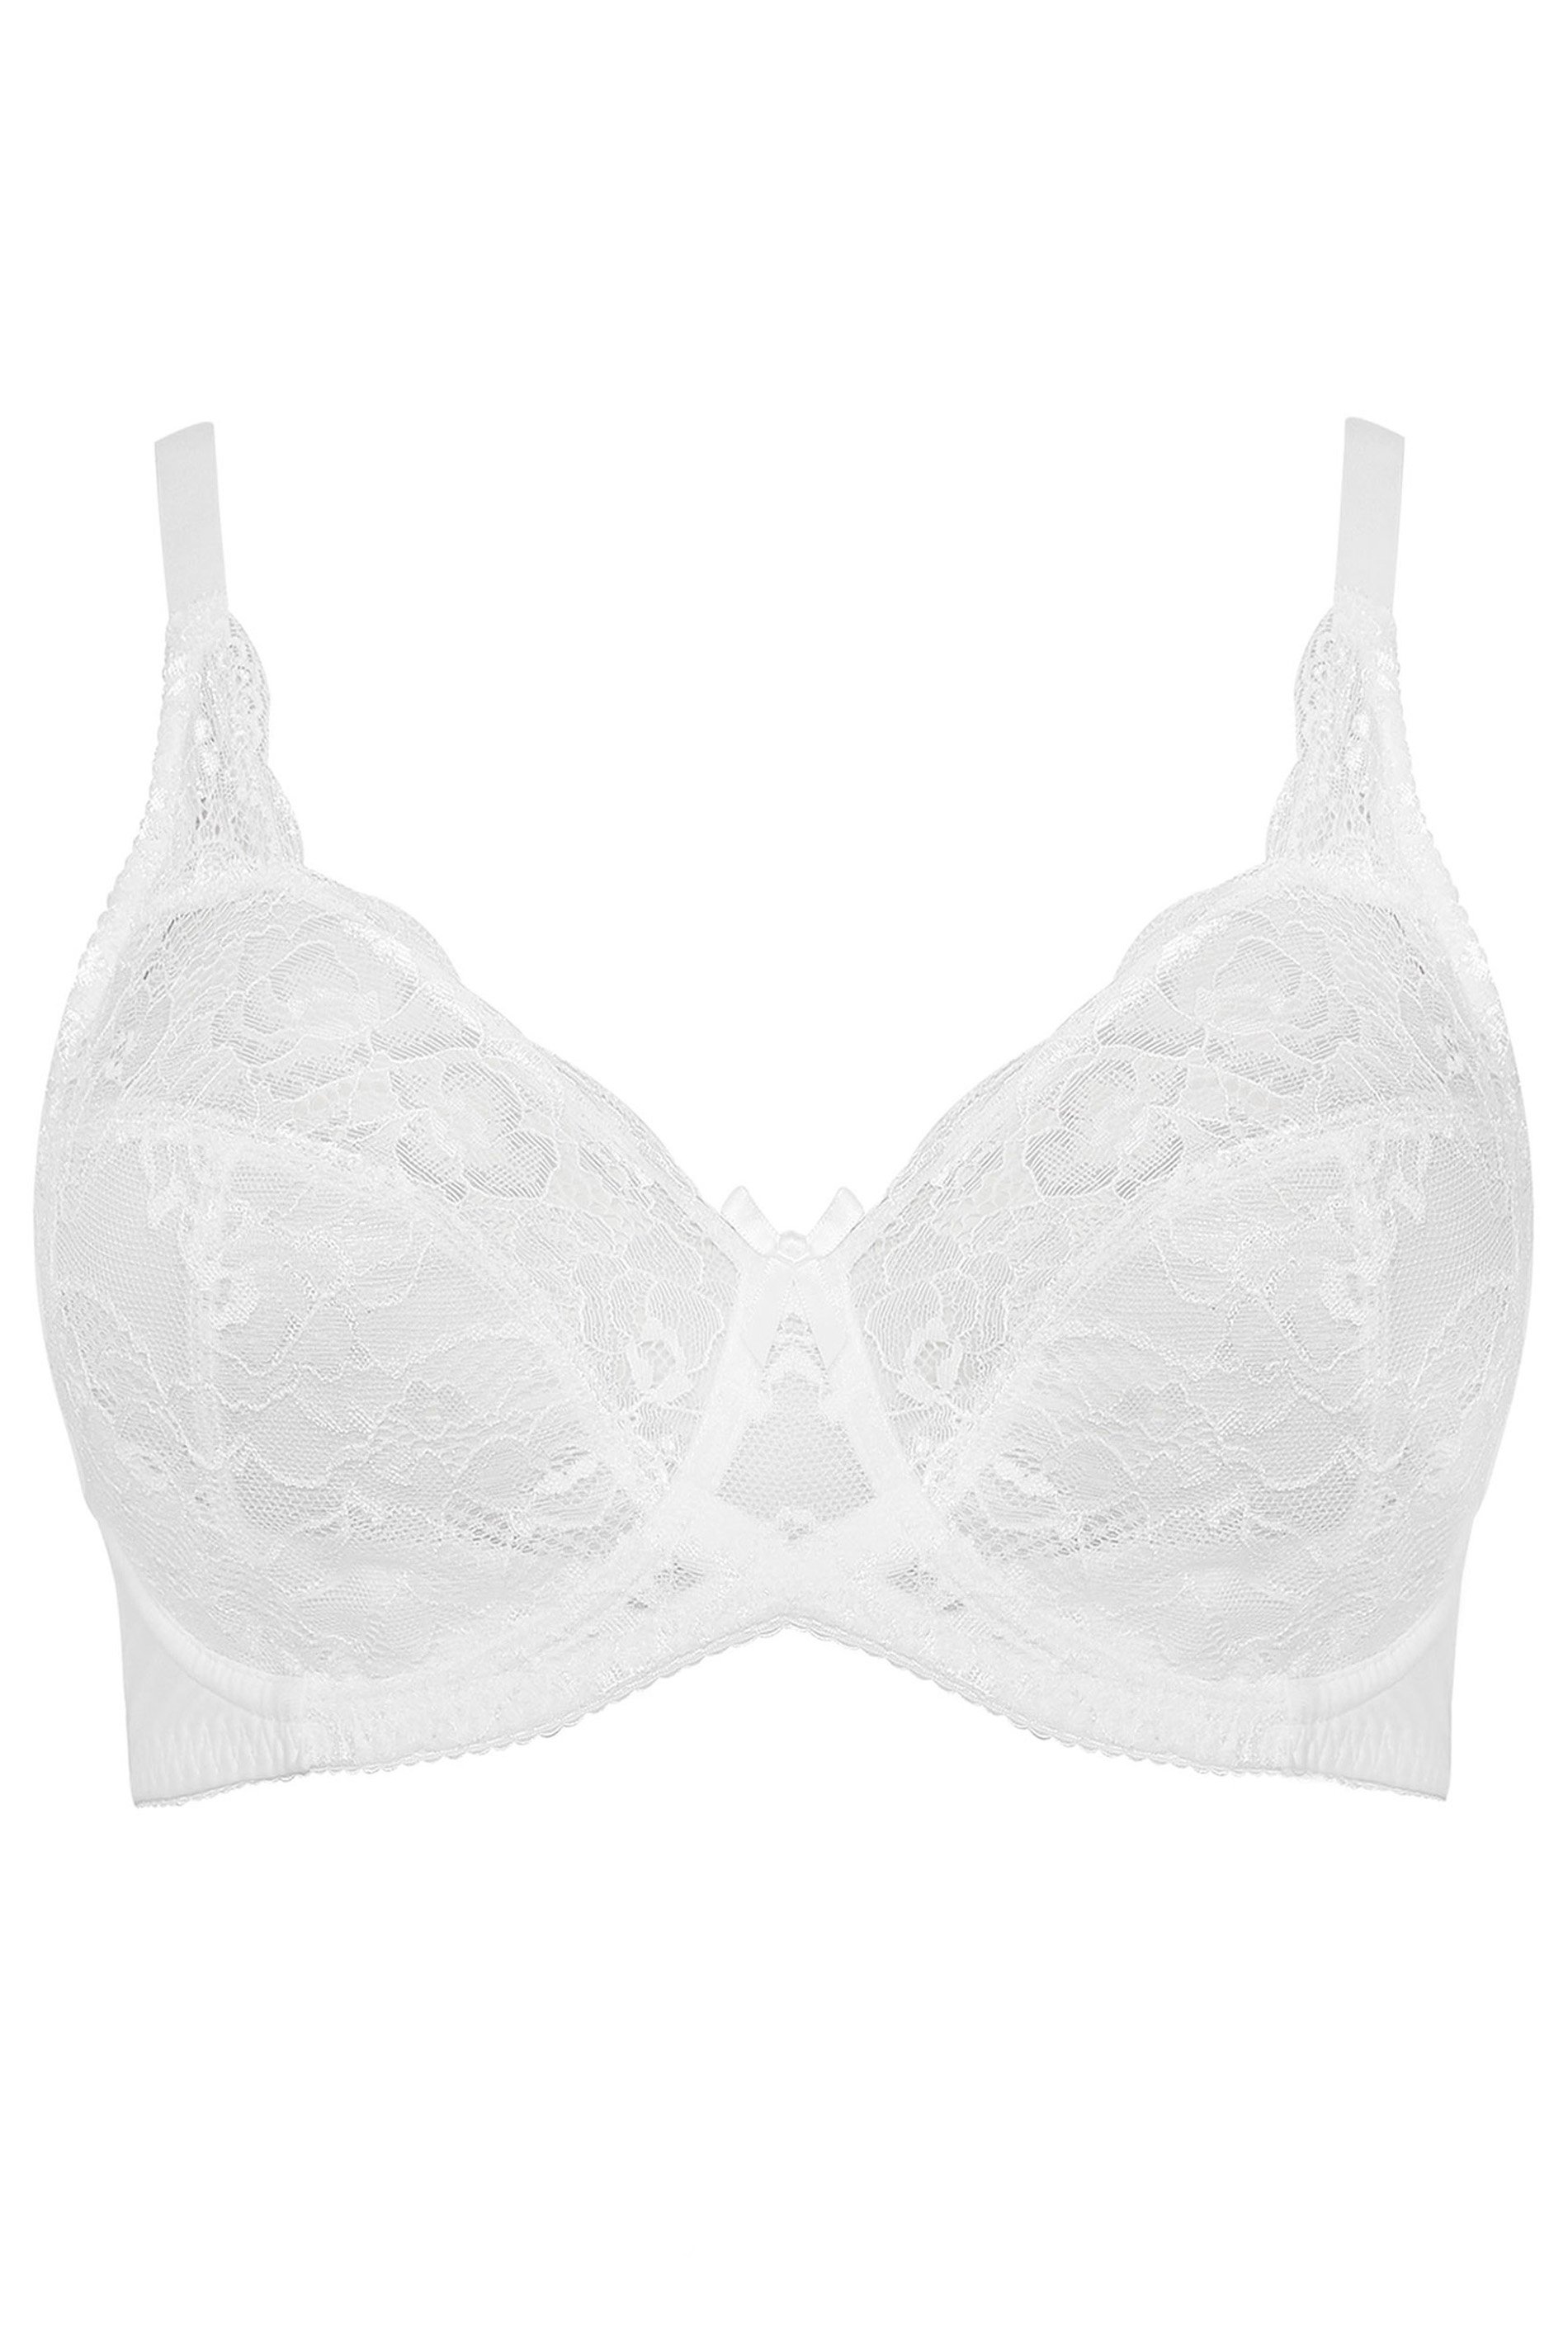 Plus Size White Stretch Lace Non-Padded Underwired Balcony Bra | Yours Clothing 3